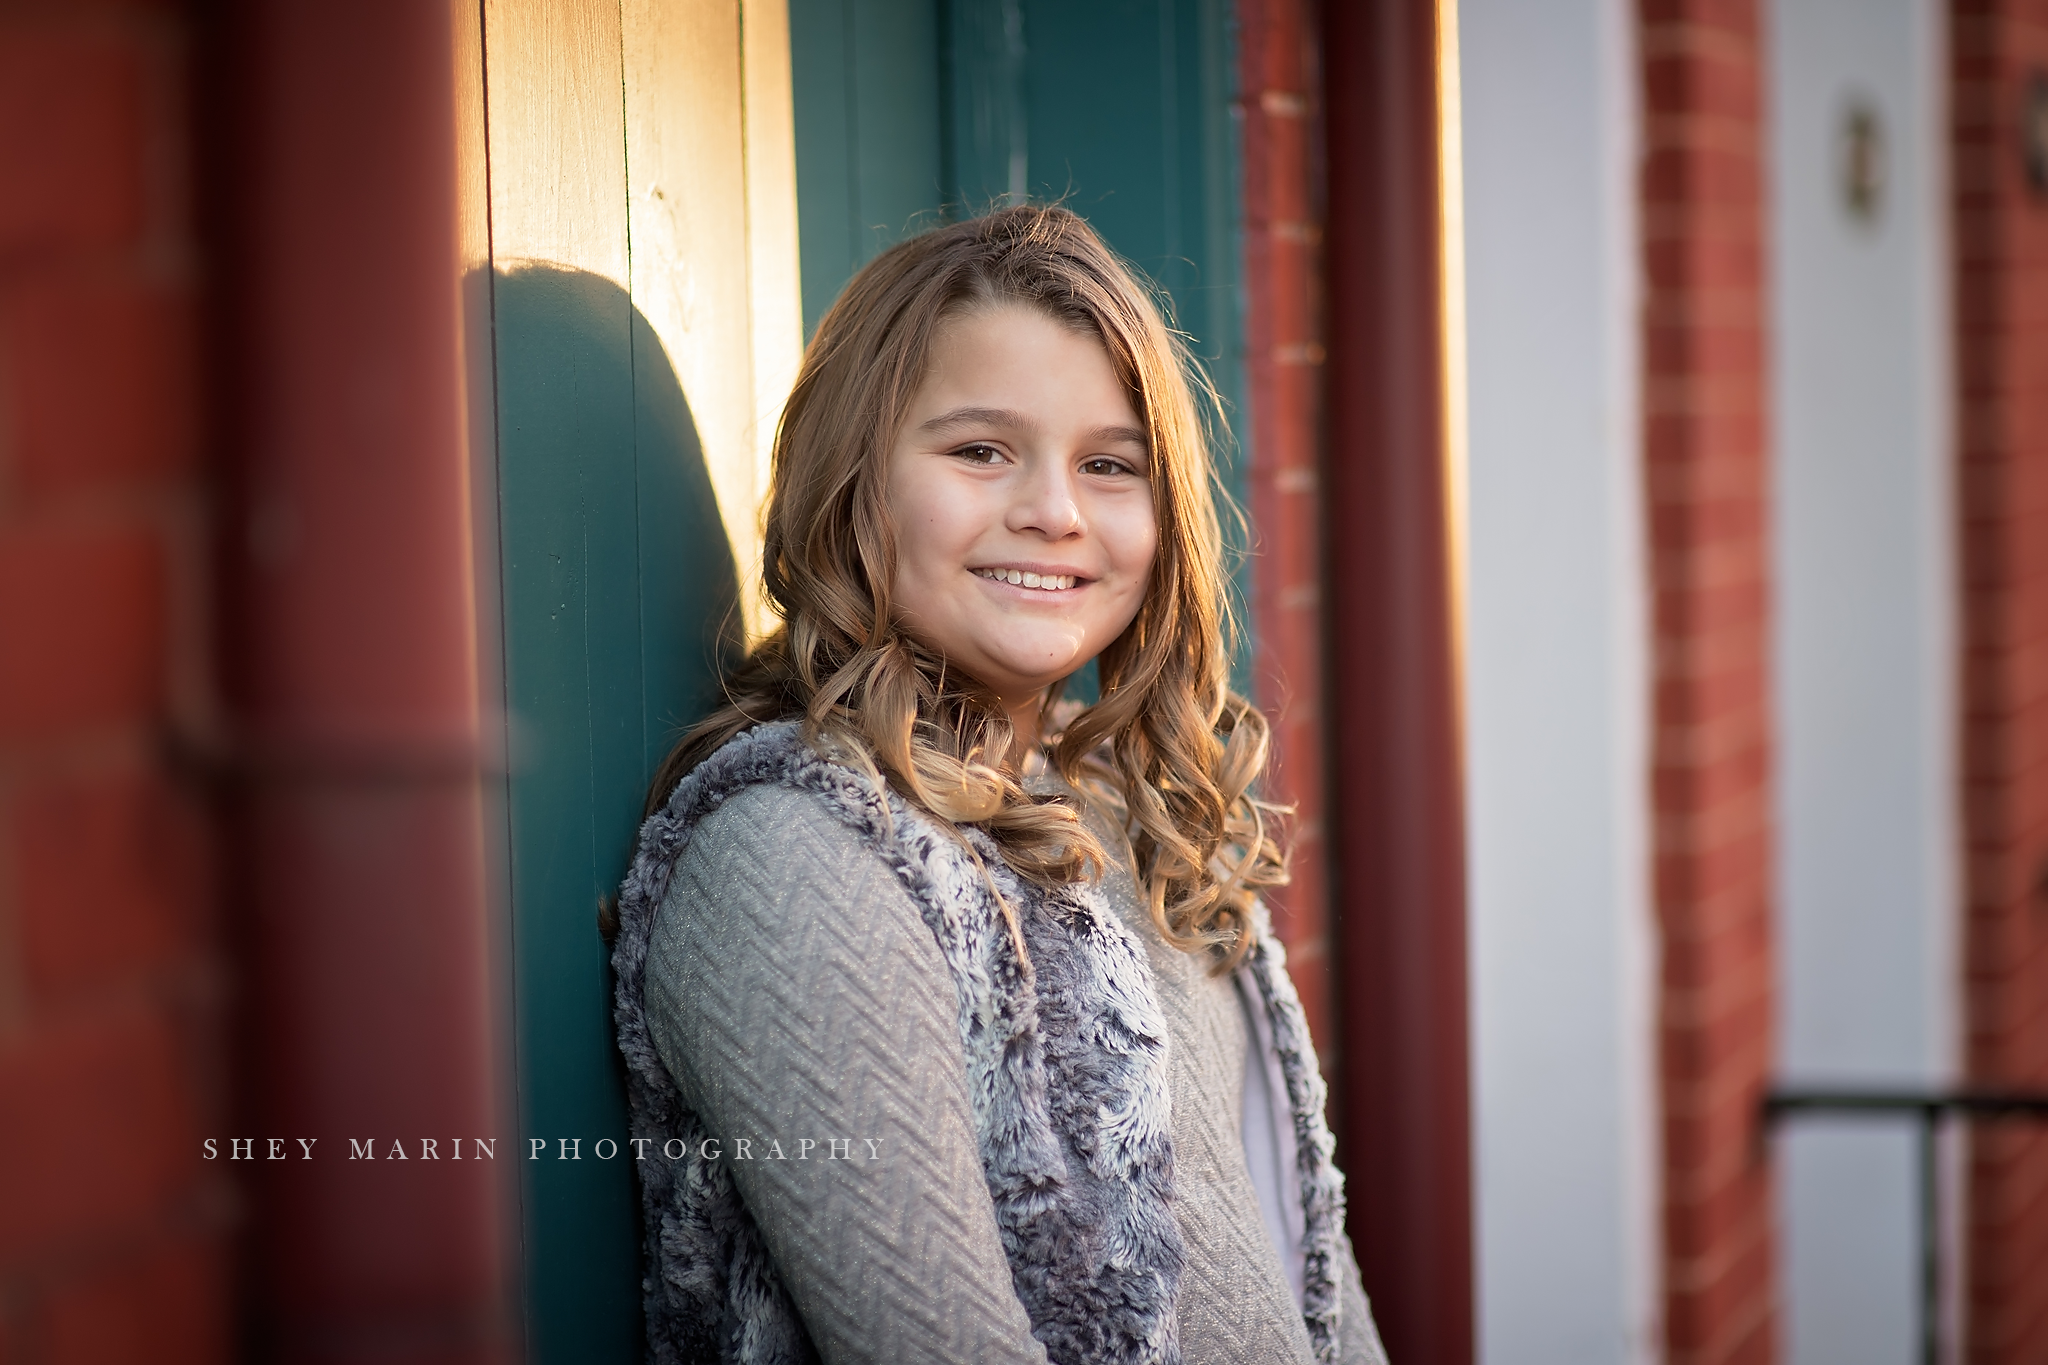 downtown Frederick Maryland family photosession winter